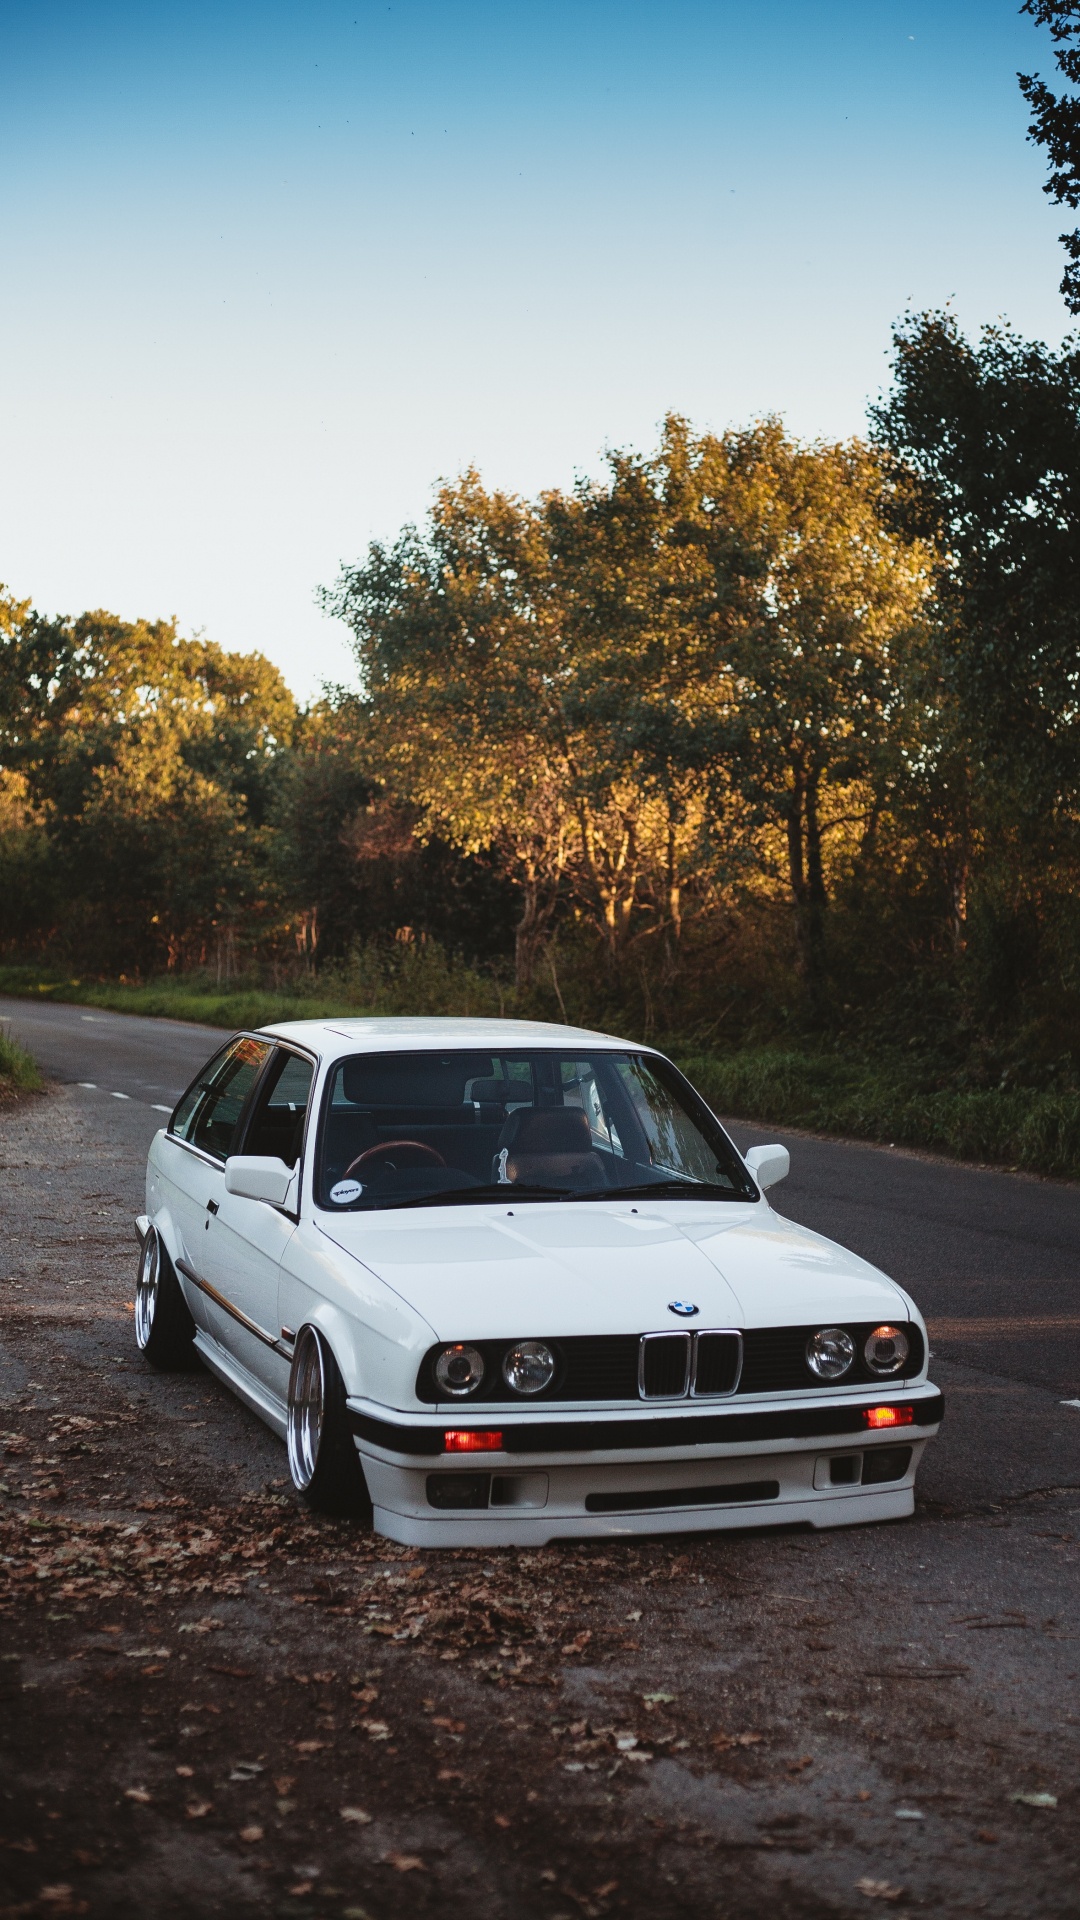 White Bmw m 3 on Road During Daytime. Wallpaper in 1080x1920 Resolution